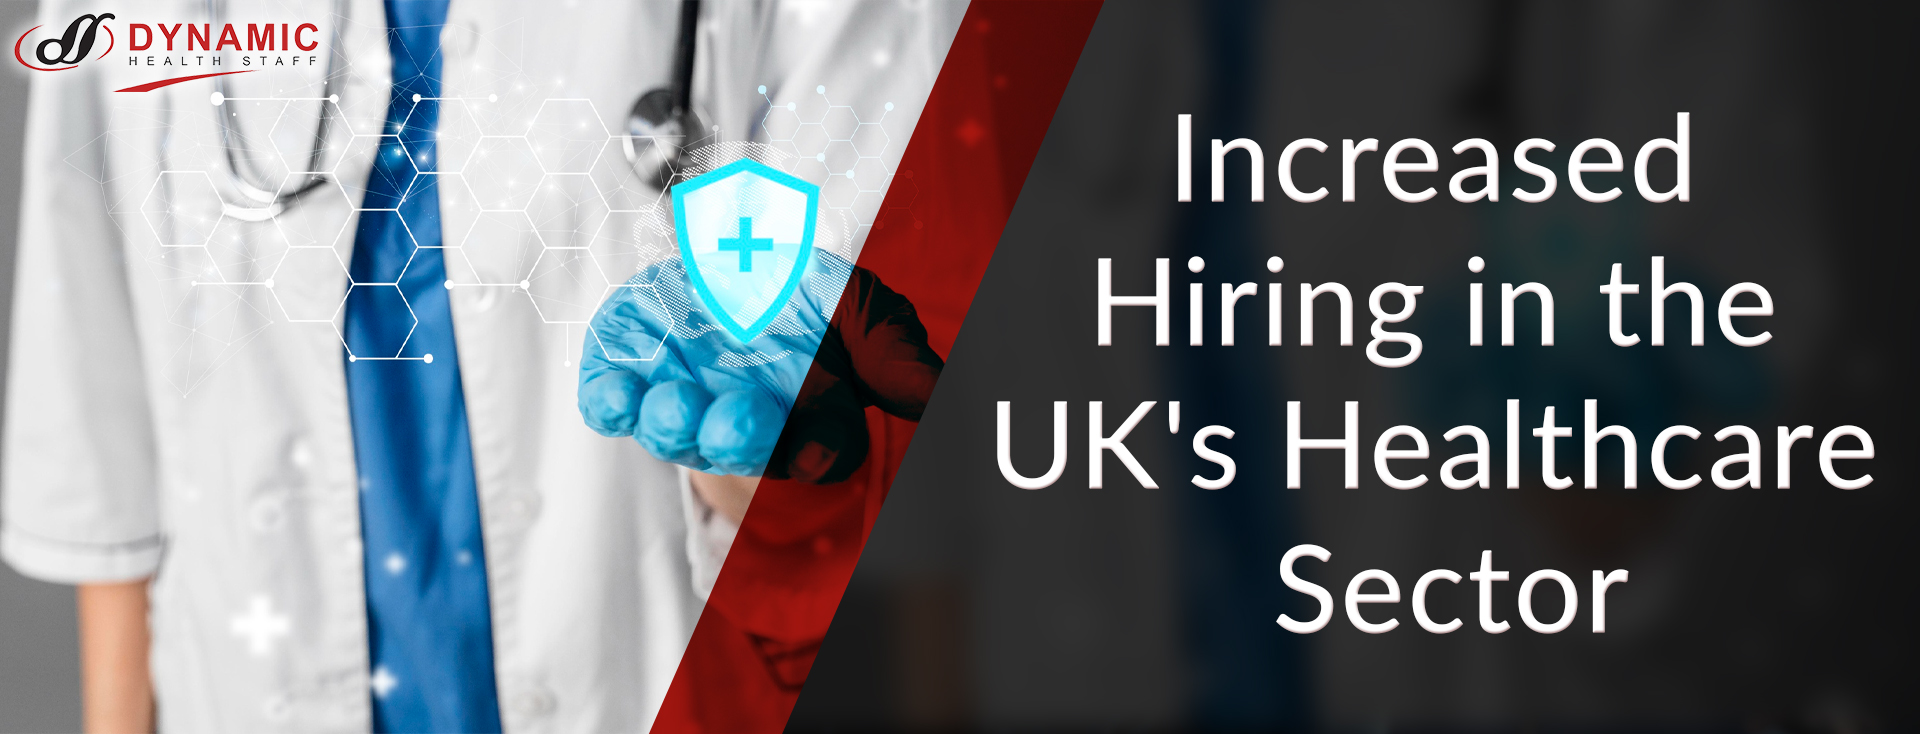 Increased Hiring in the UK's Healthcare Sector